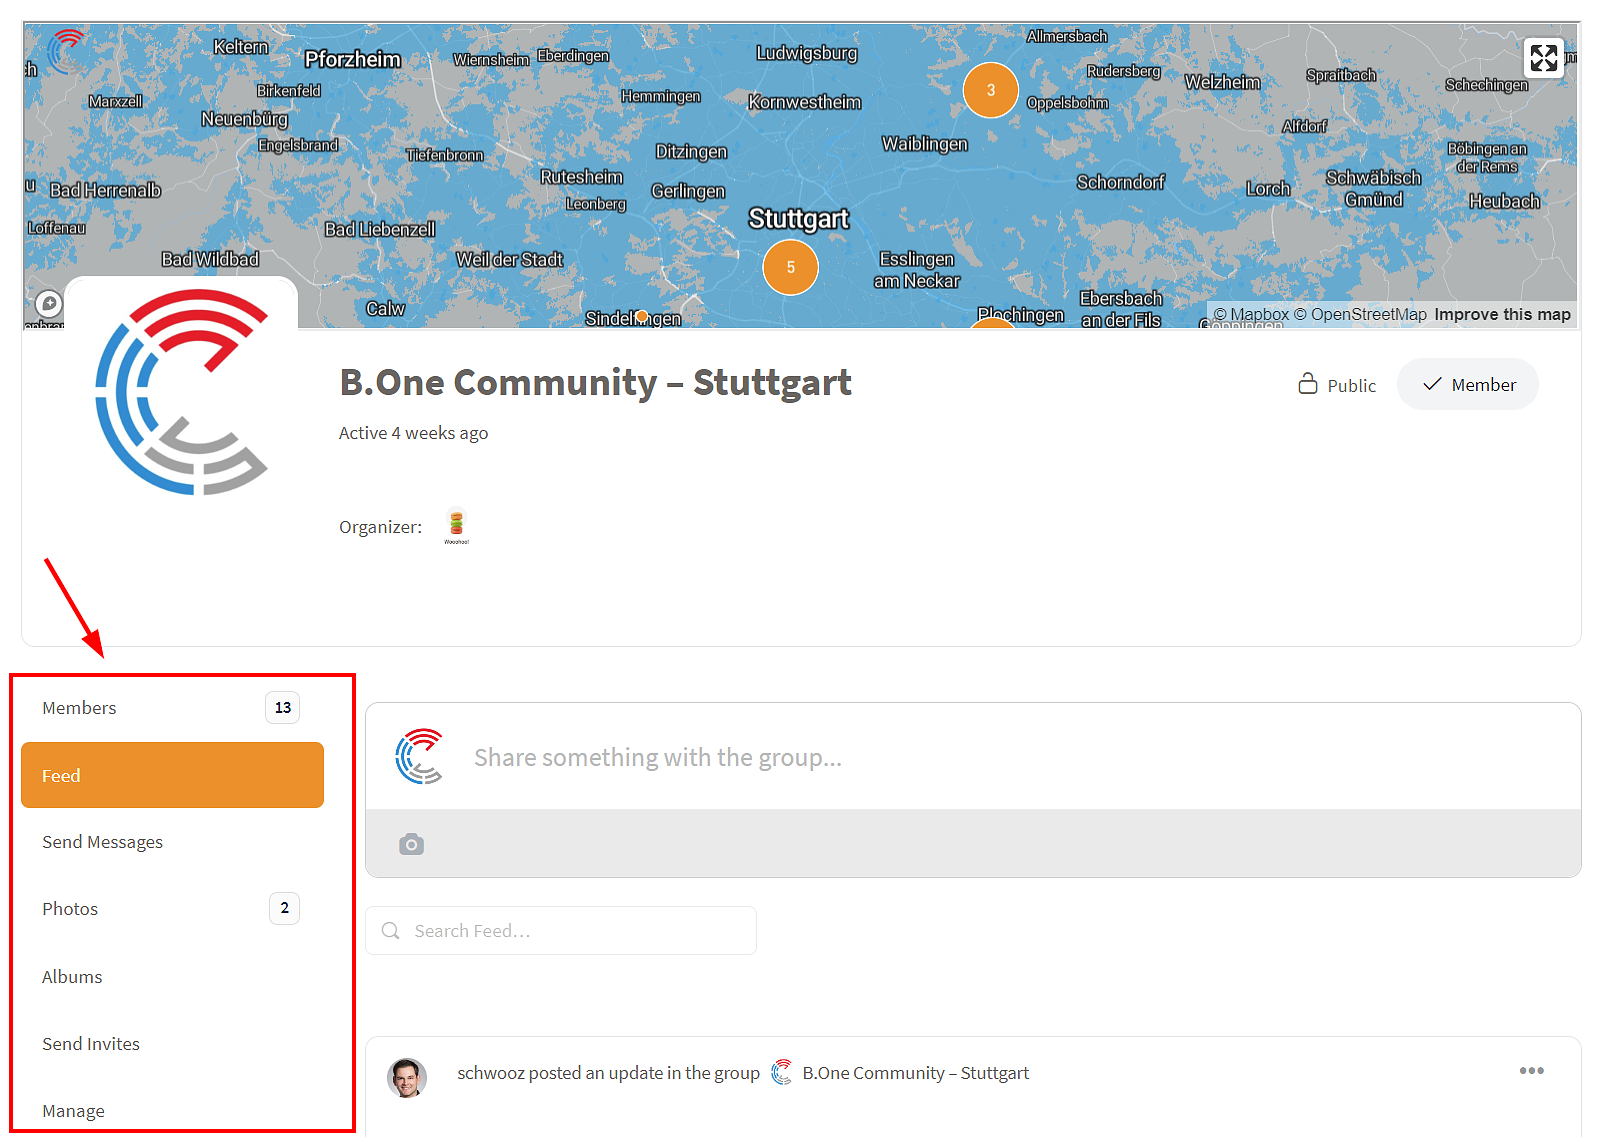 B.One Community: Basic structure of a Community using the example of Stuttgart